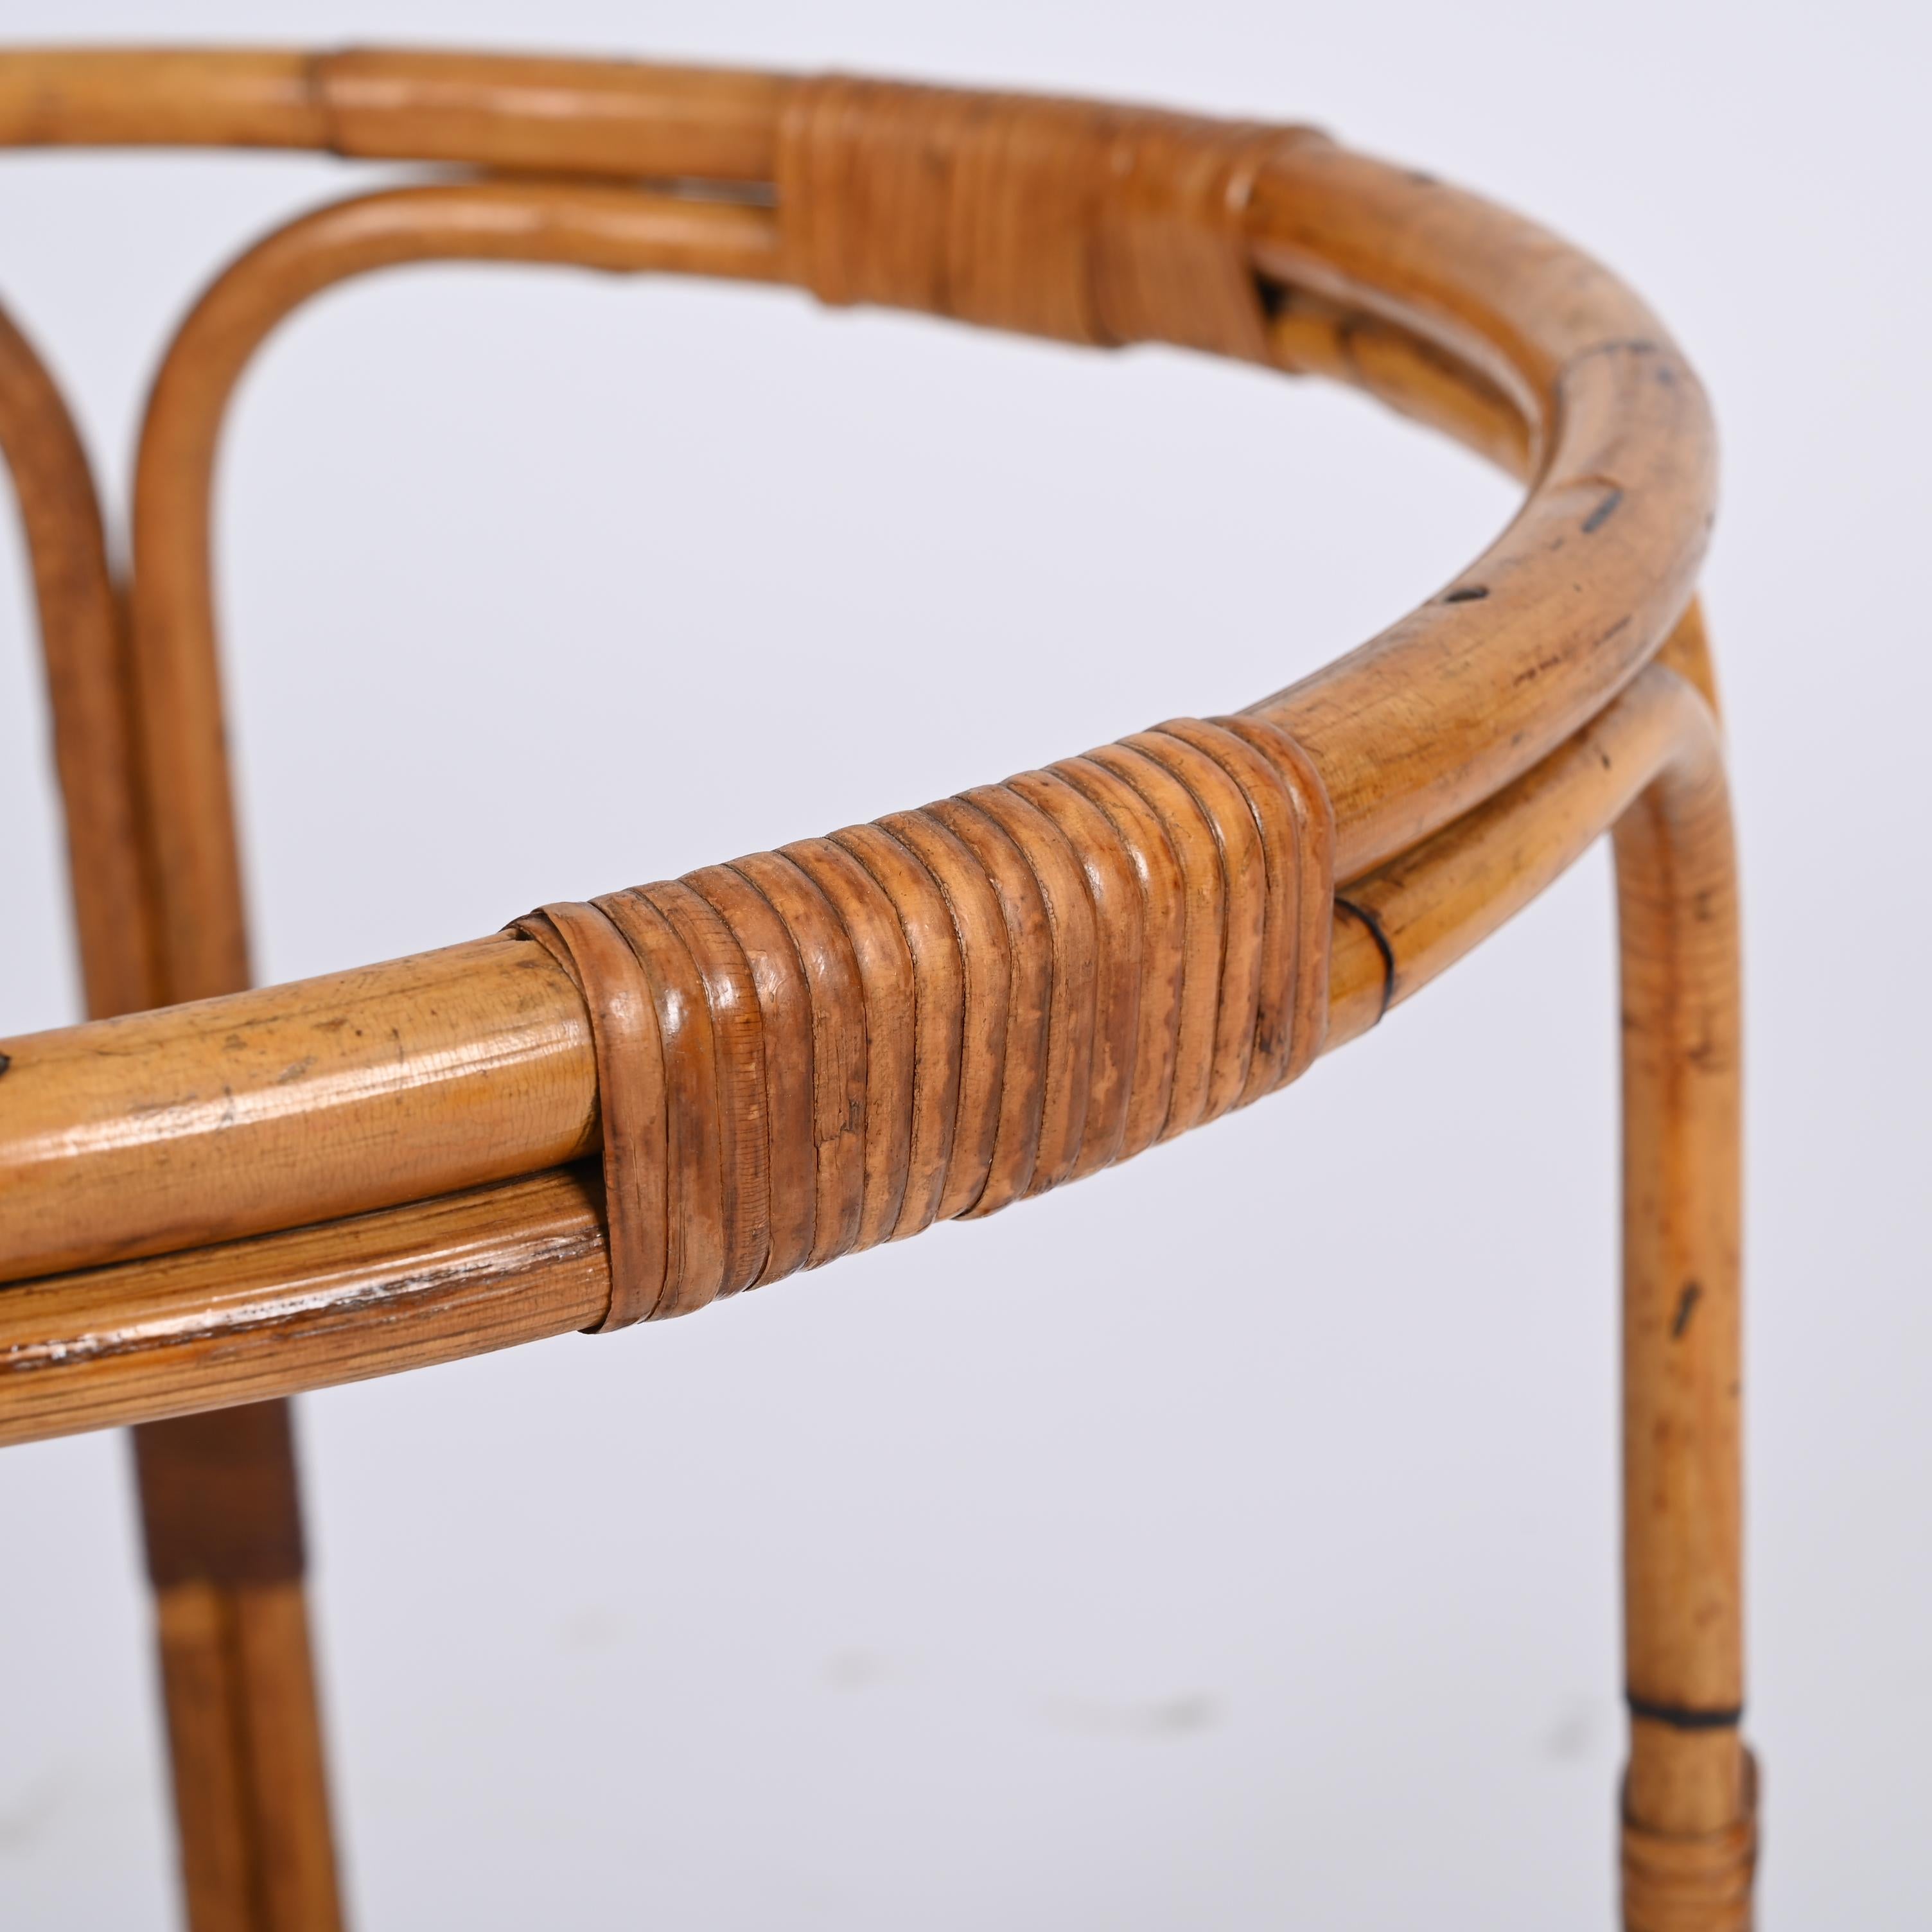 Midcentury Round Rattan, Bamboo Italian Coffee Table with Glass Shelf, 1960s For Sale 9